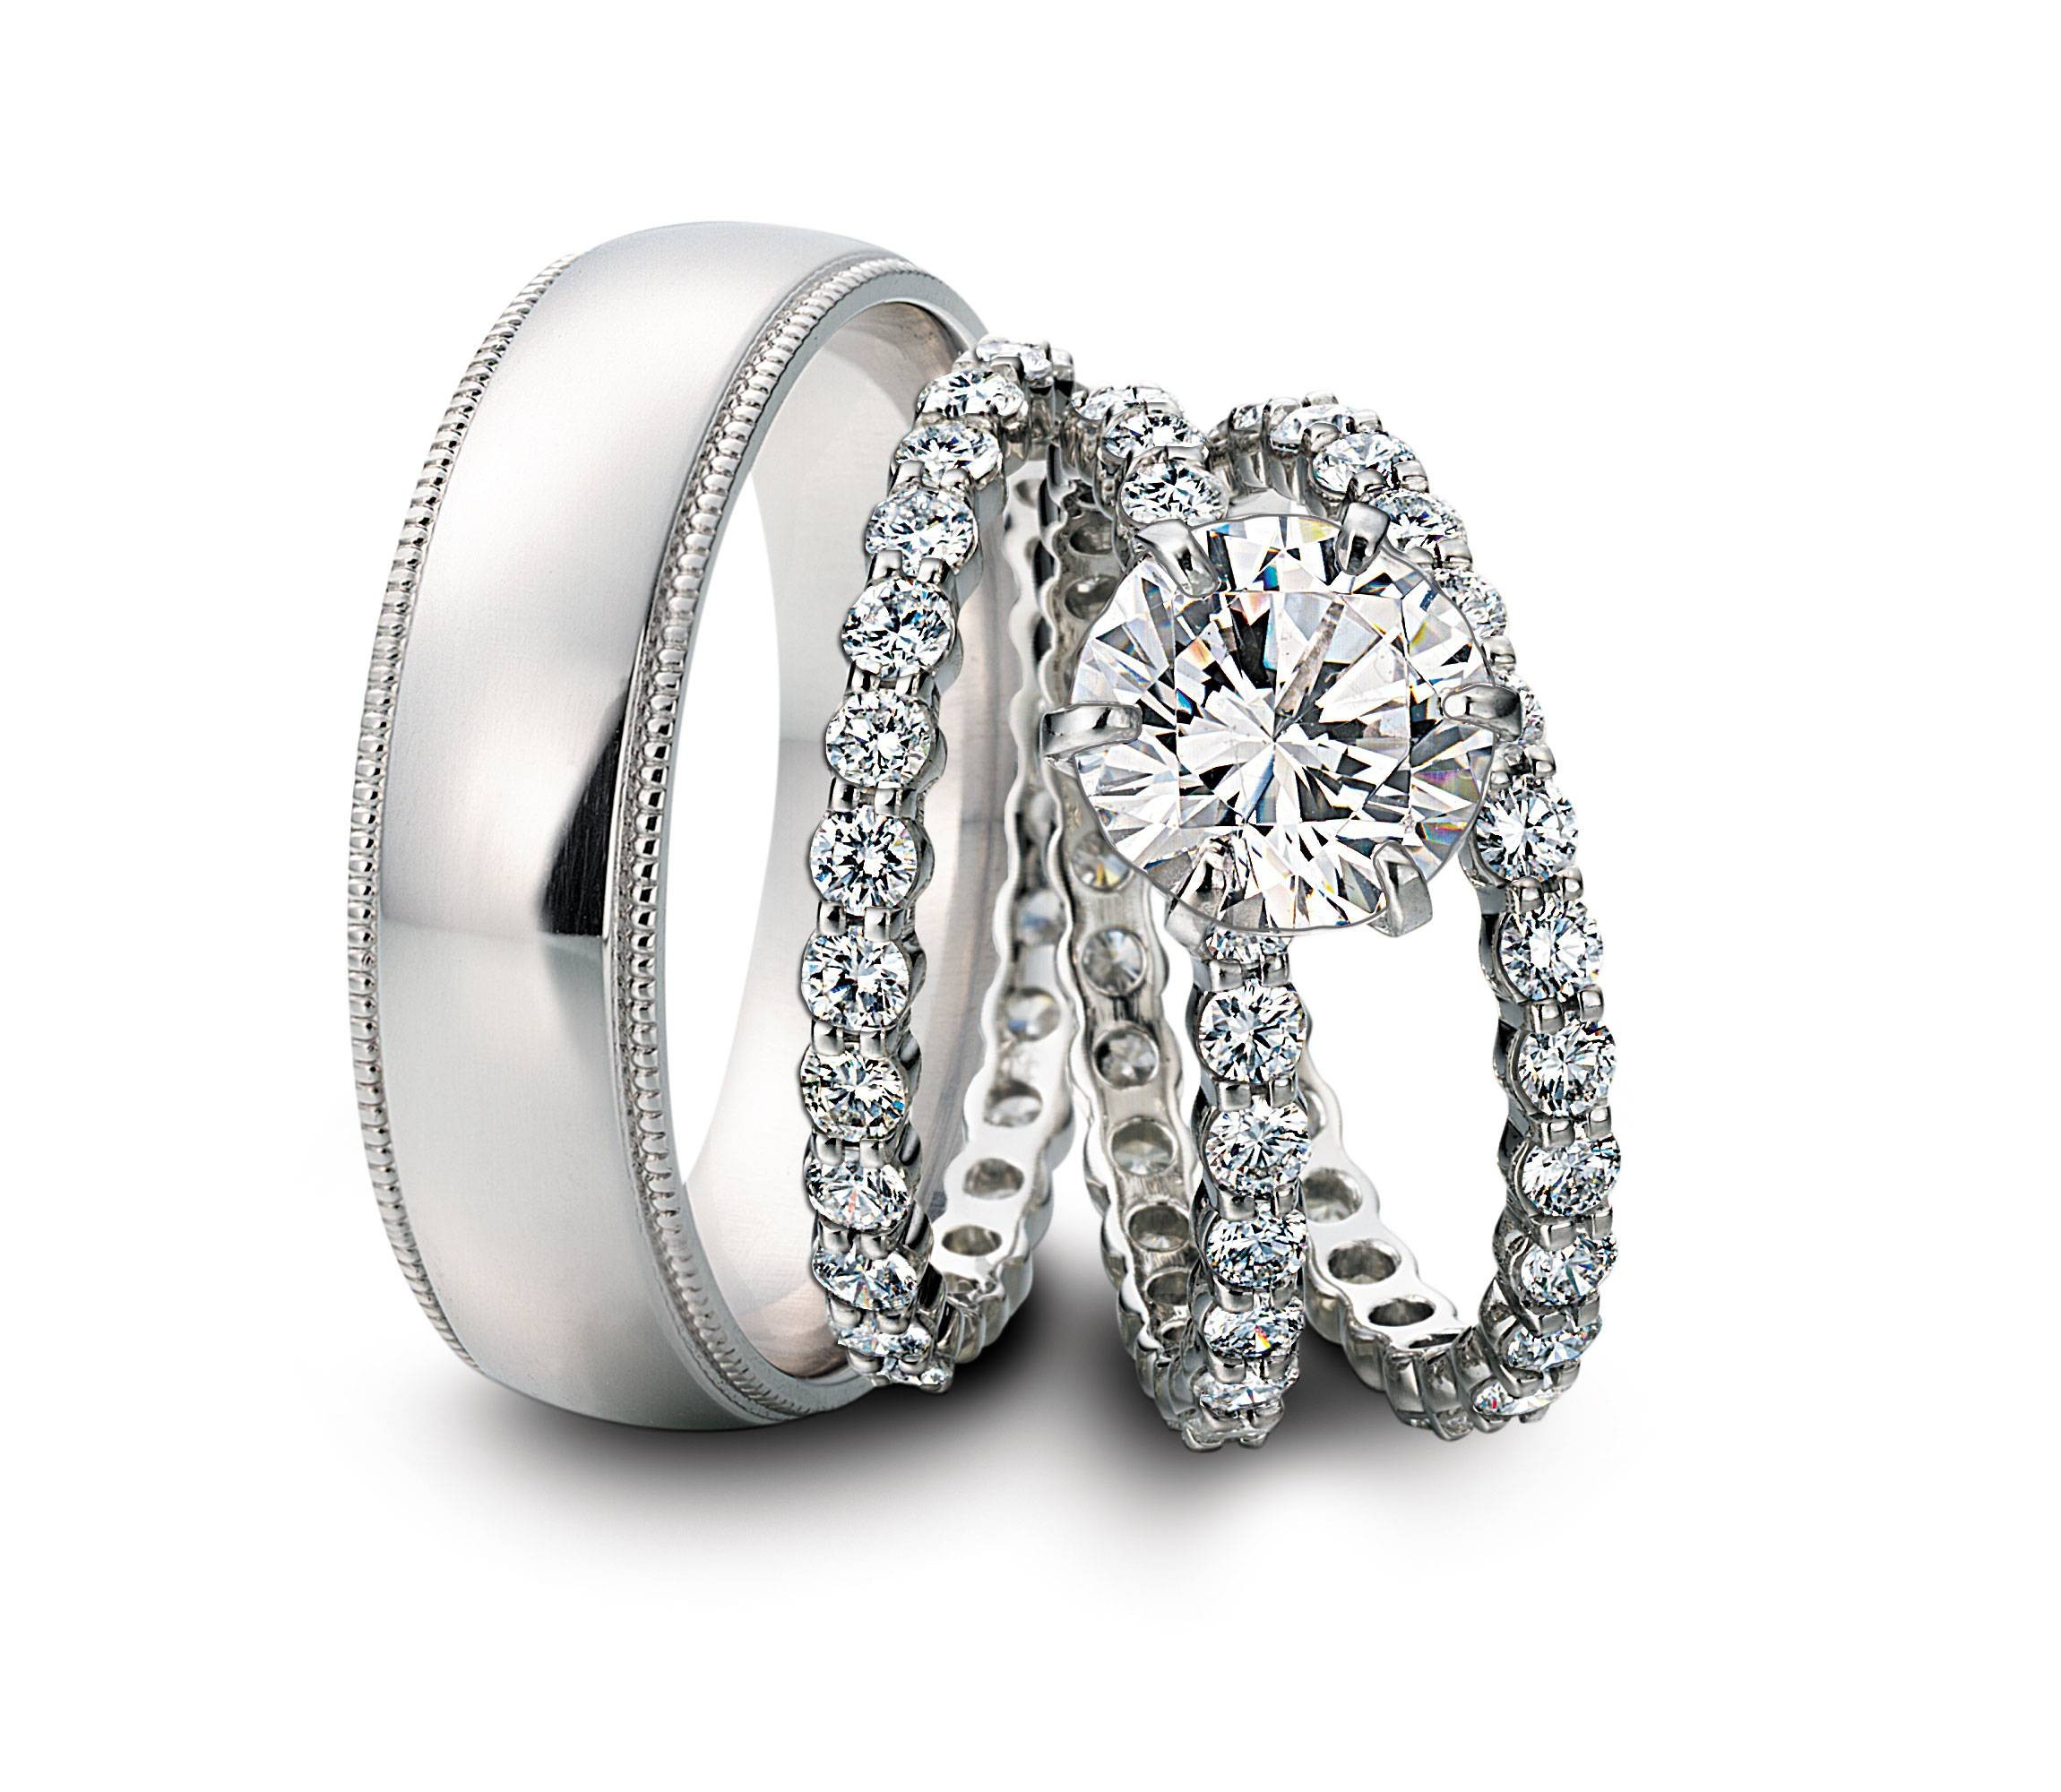 His And Hers Wedding Rings Cheap
 15 Inspirations of Cheap Wedding Bands Sets His And Hers